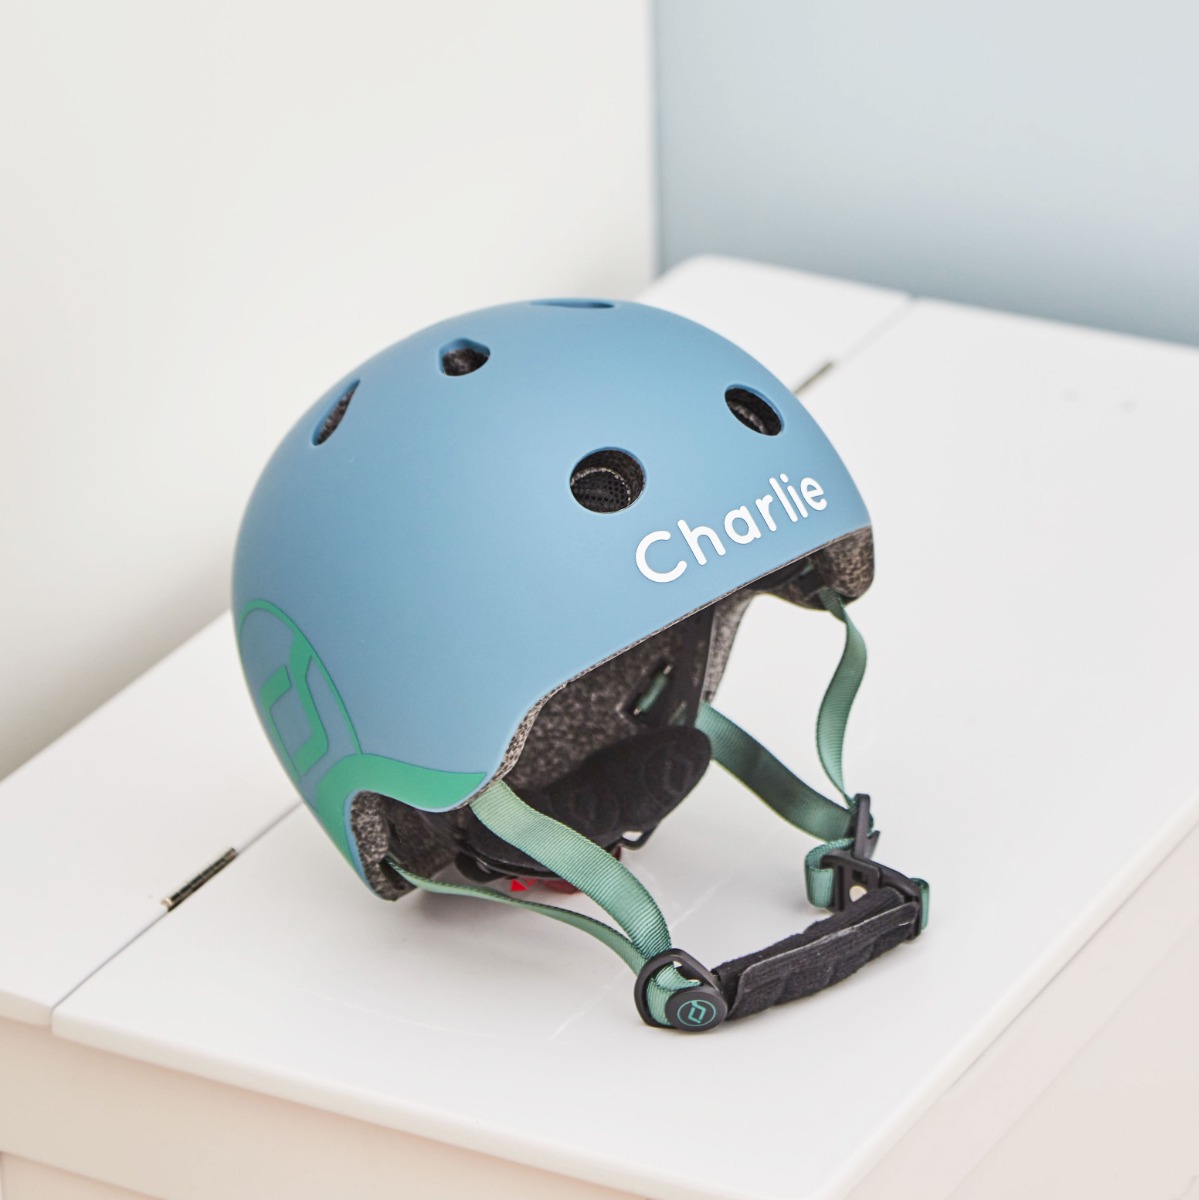 Personalised Scoot and Ride Steel Blue Helmet XXS-S